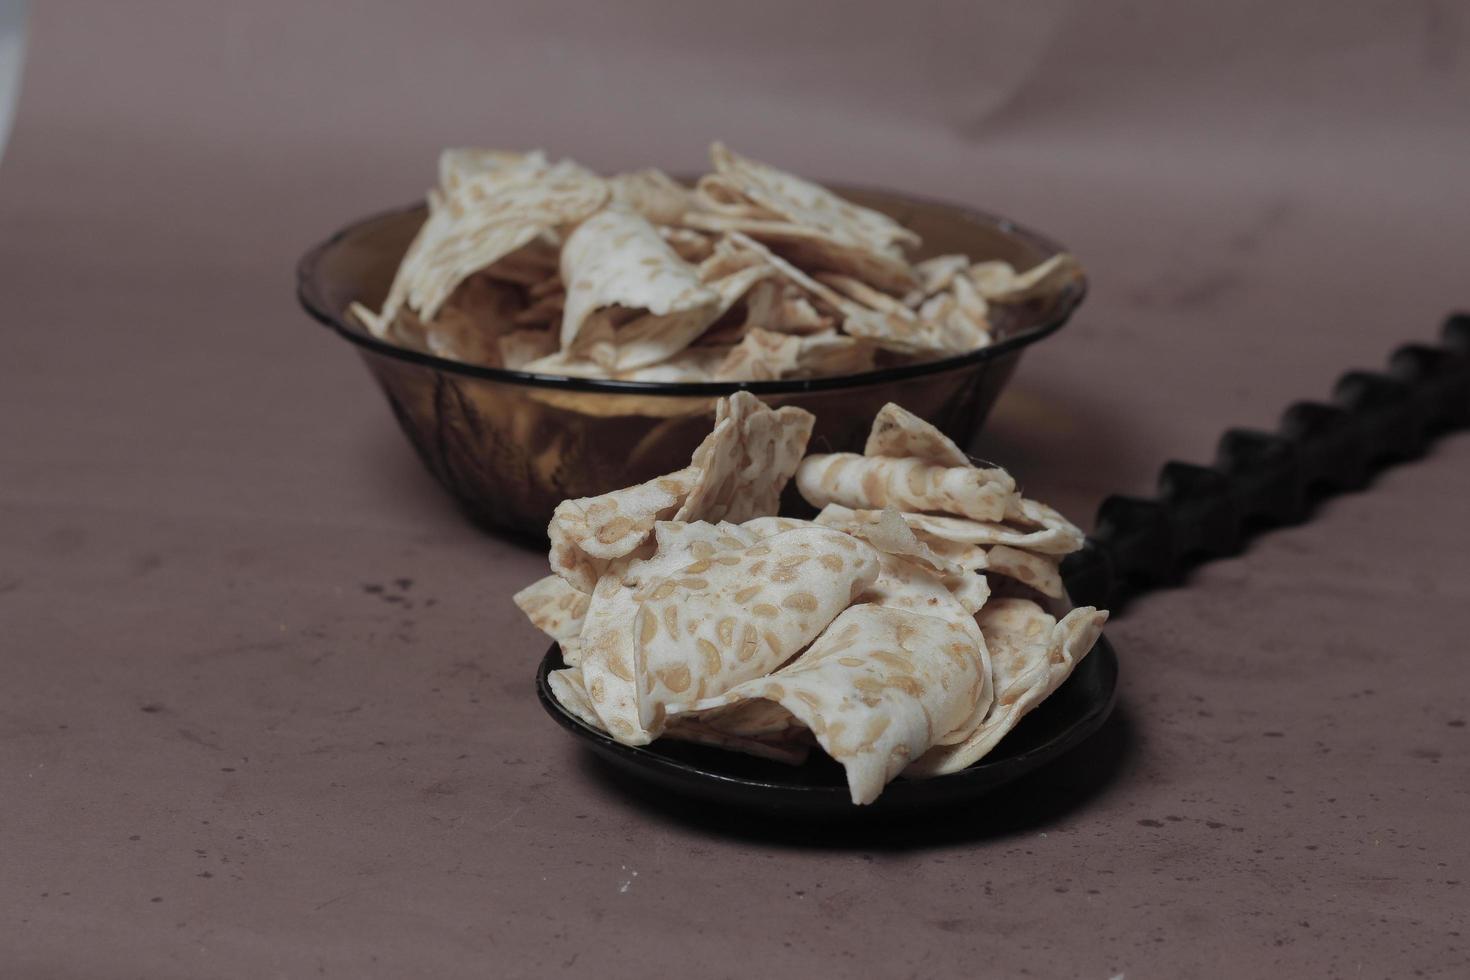 Tempe chips is Indonesian snack made from fermented soybeans. slices of delicious and savory tempeh chips. soy chips are crunchy. These chips are suitable for snacks to accompany your relaxing time. photo